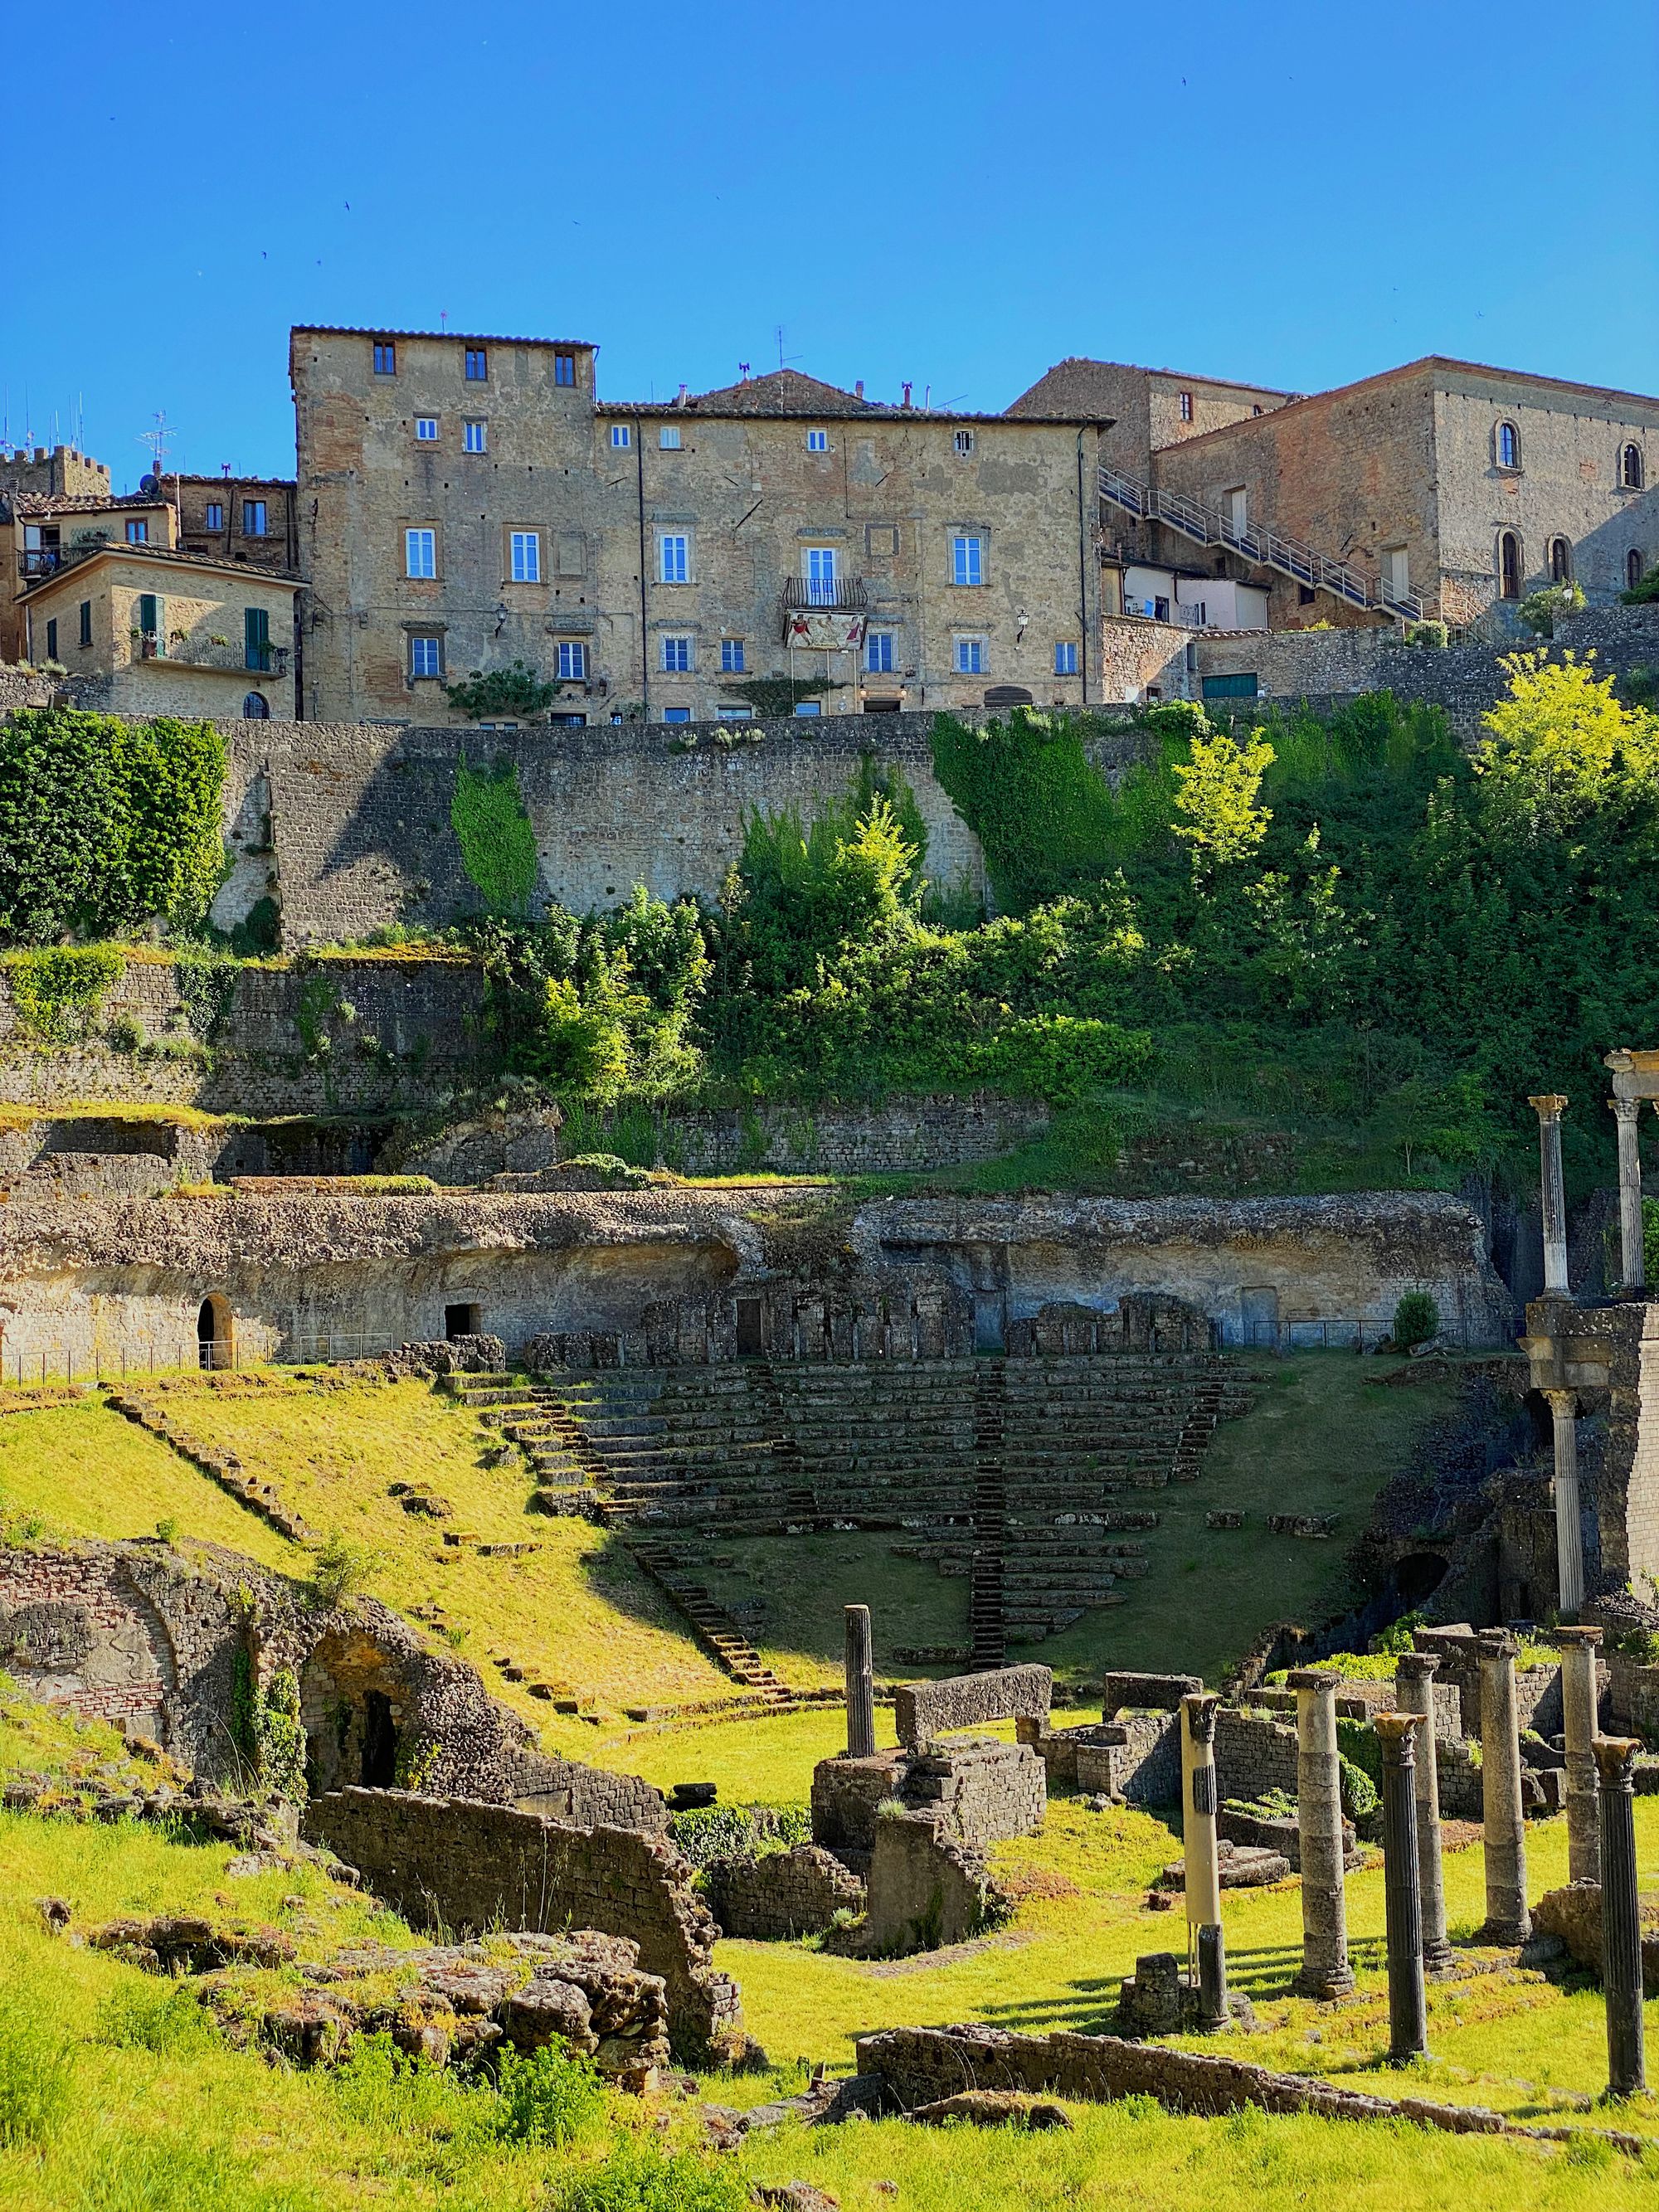 The remains of the roman forum in Volterra